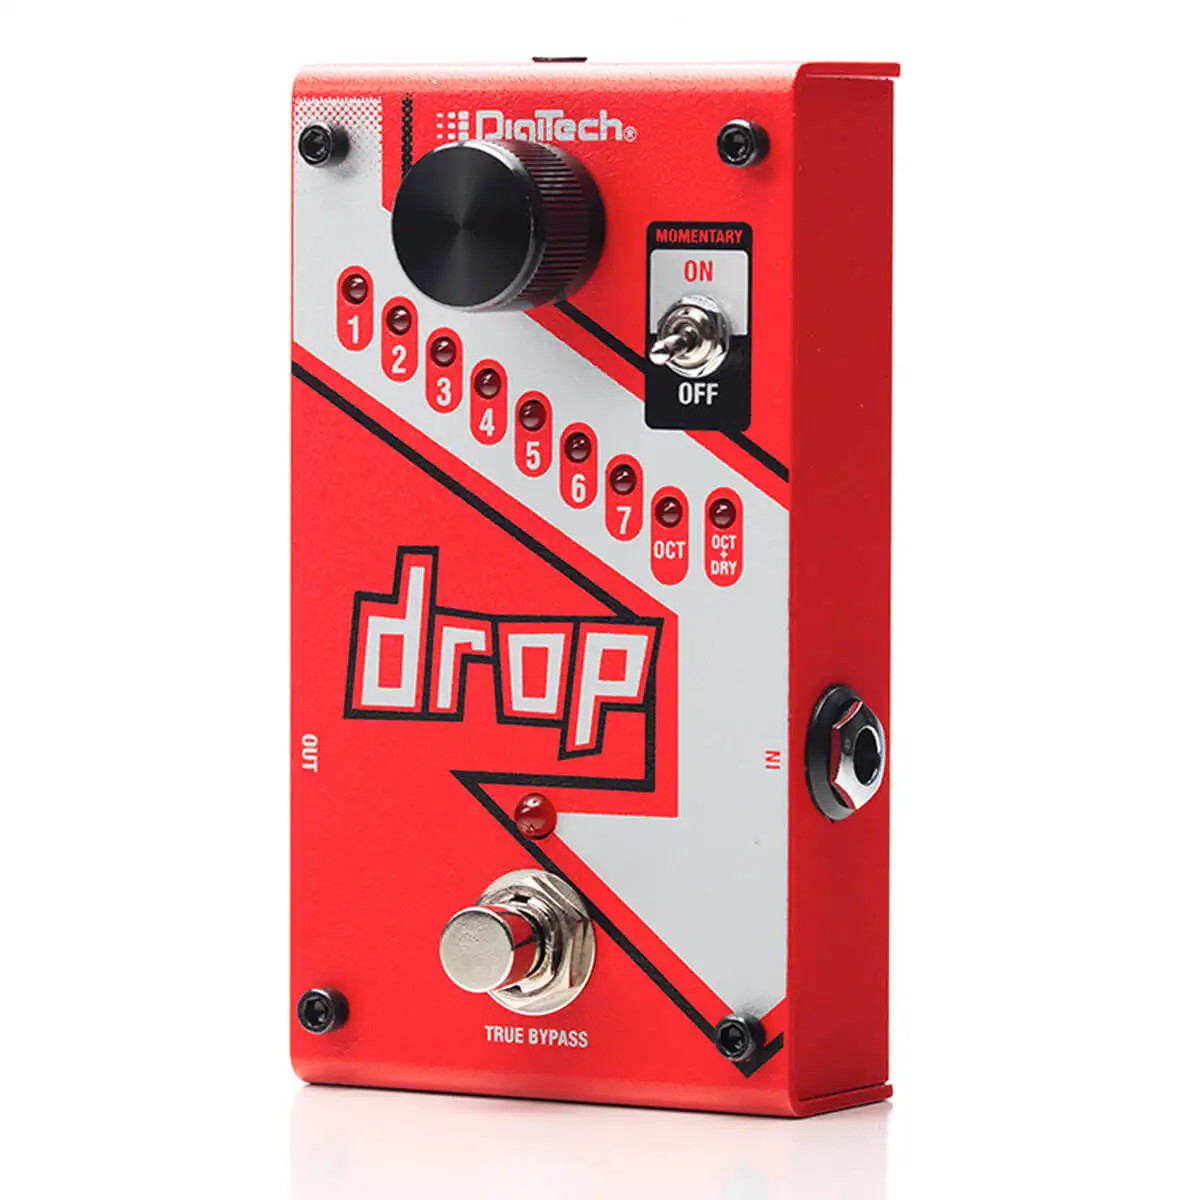 drop　with　a　Drop　pedal　dedicated　switch　polyphonic　DIGITECH　momentary/latching　tune　AliExpress